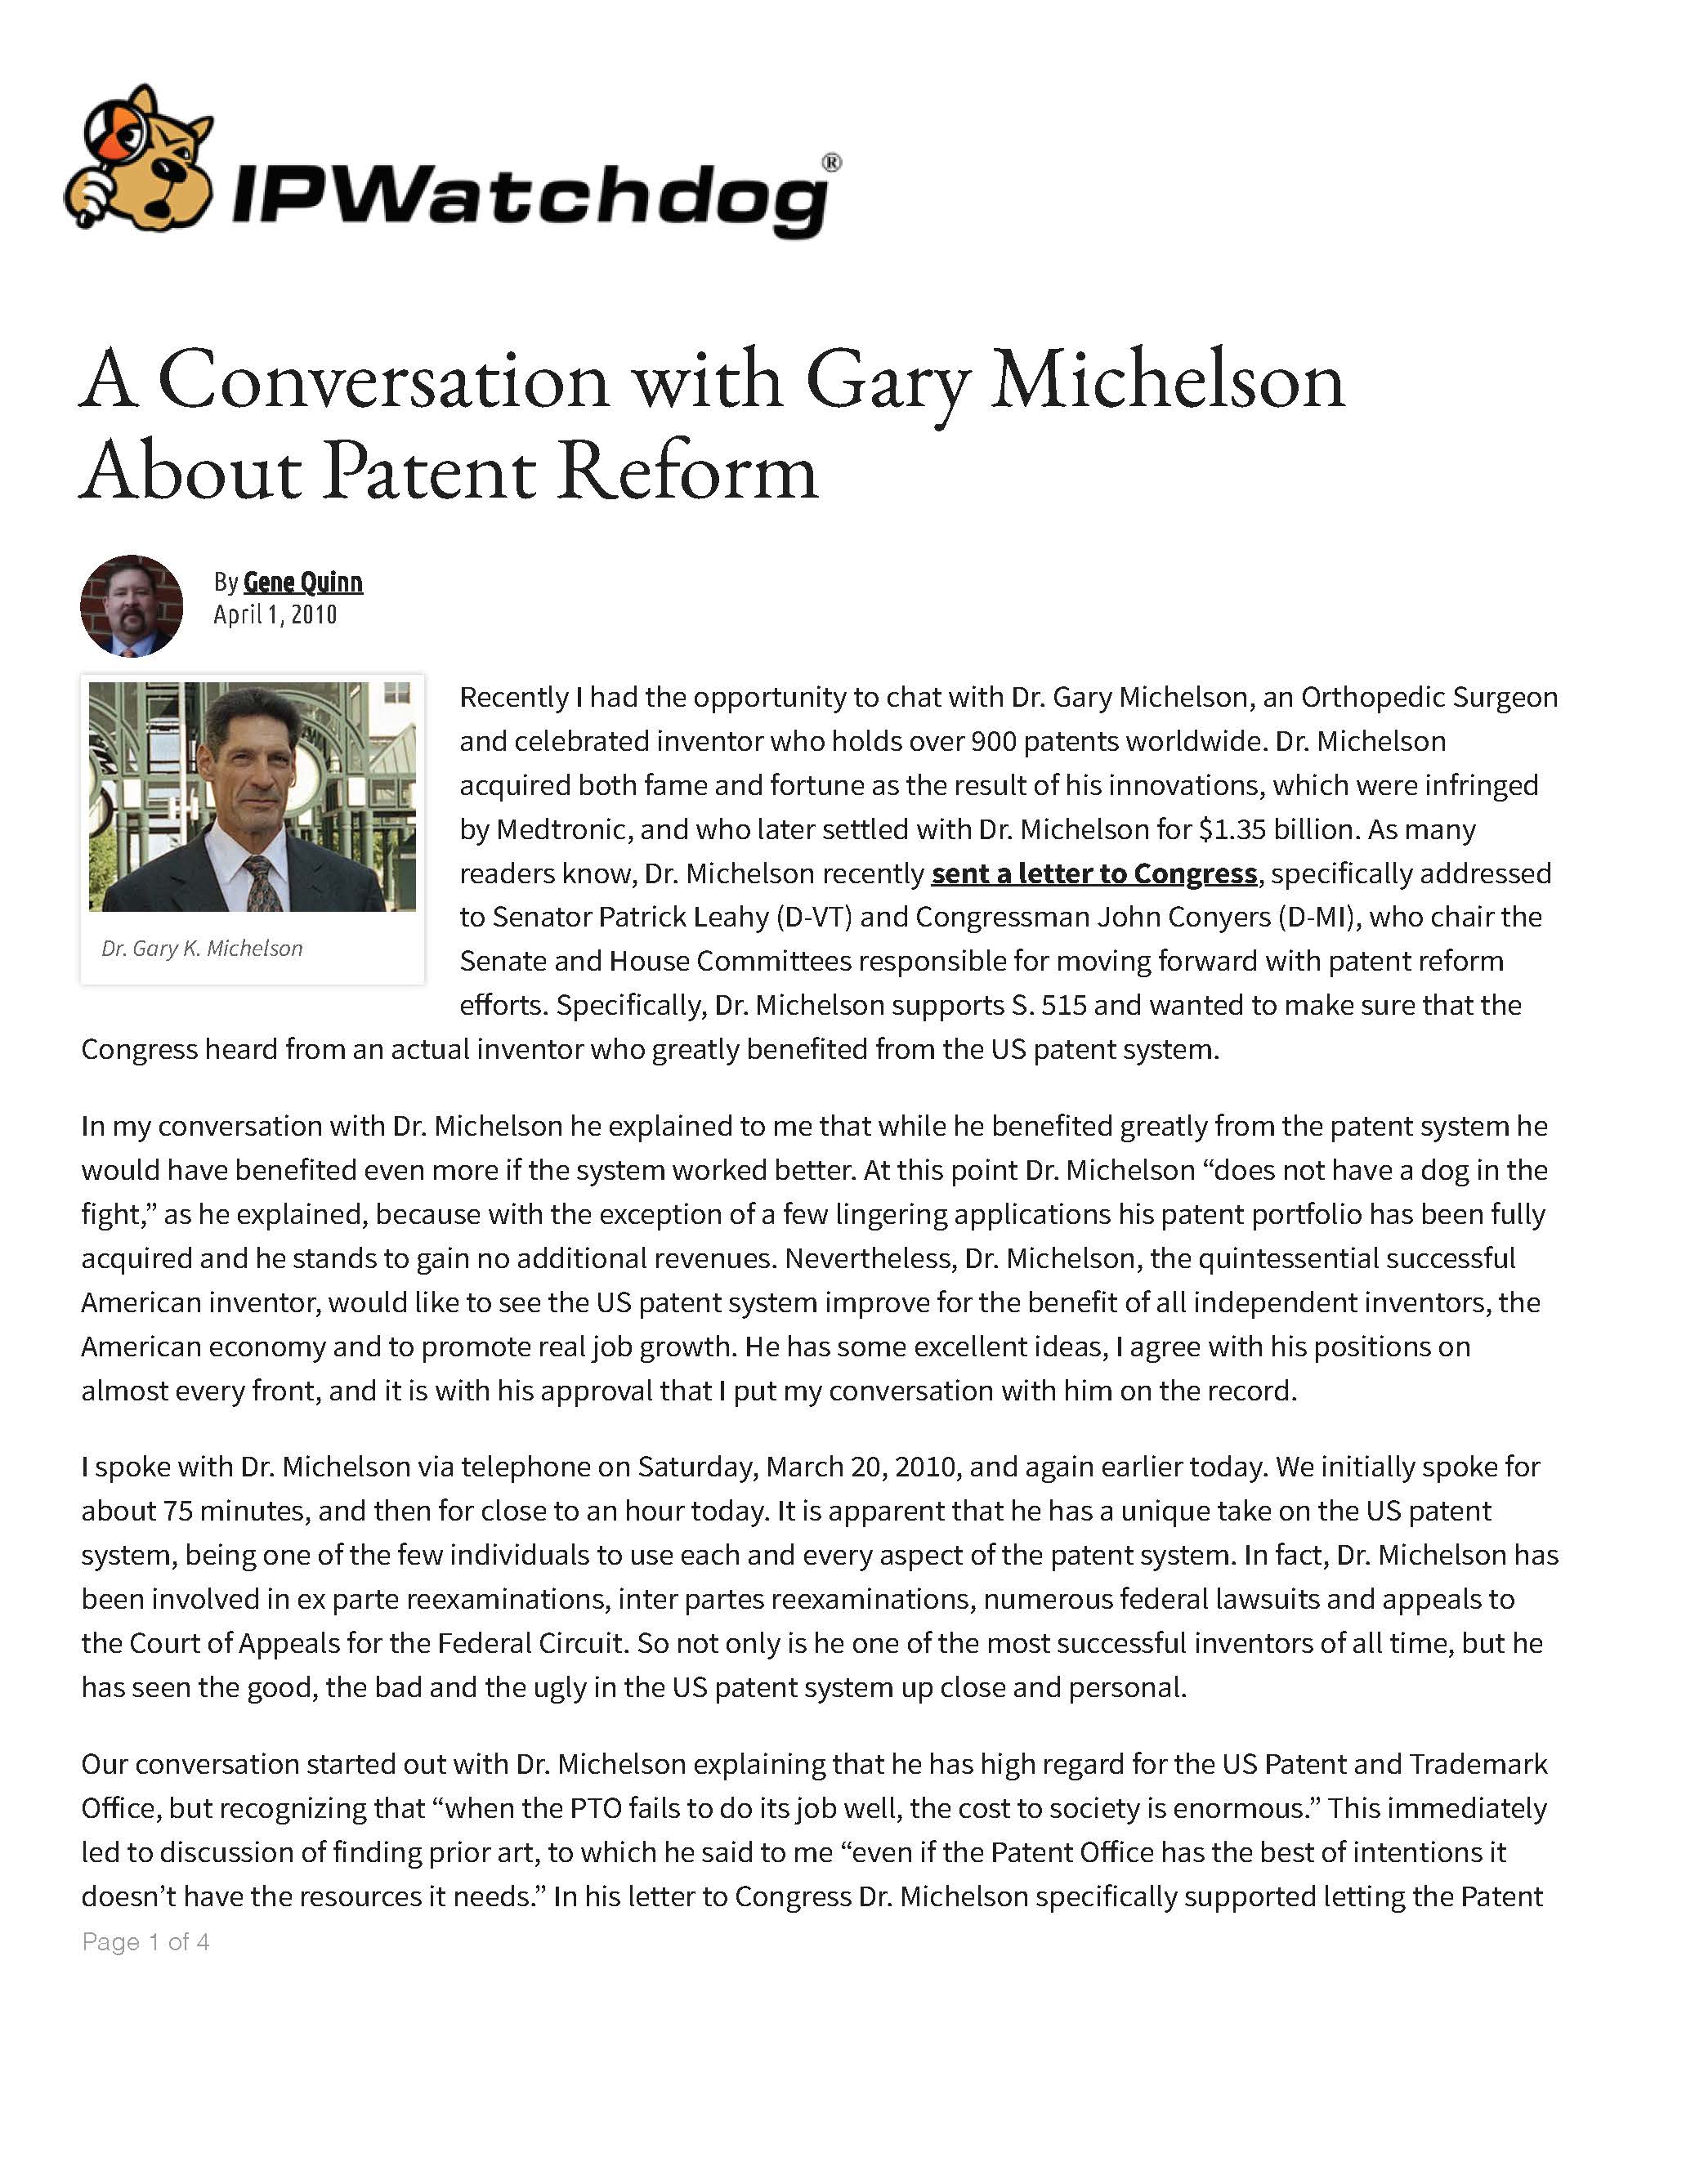 [Pg 1] A Conversation with Gary Michelson About Patent Reform | IPWatchdog.com